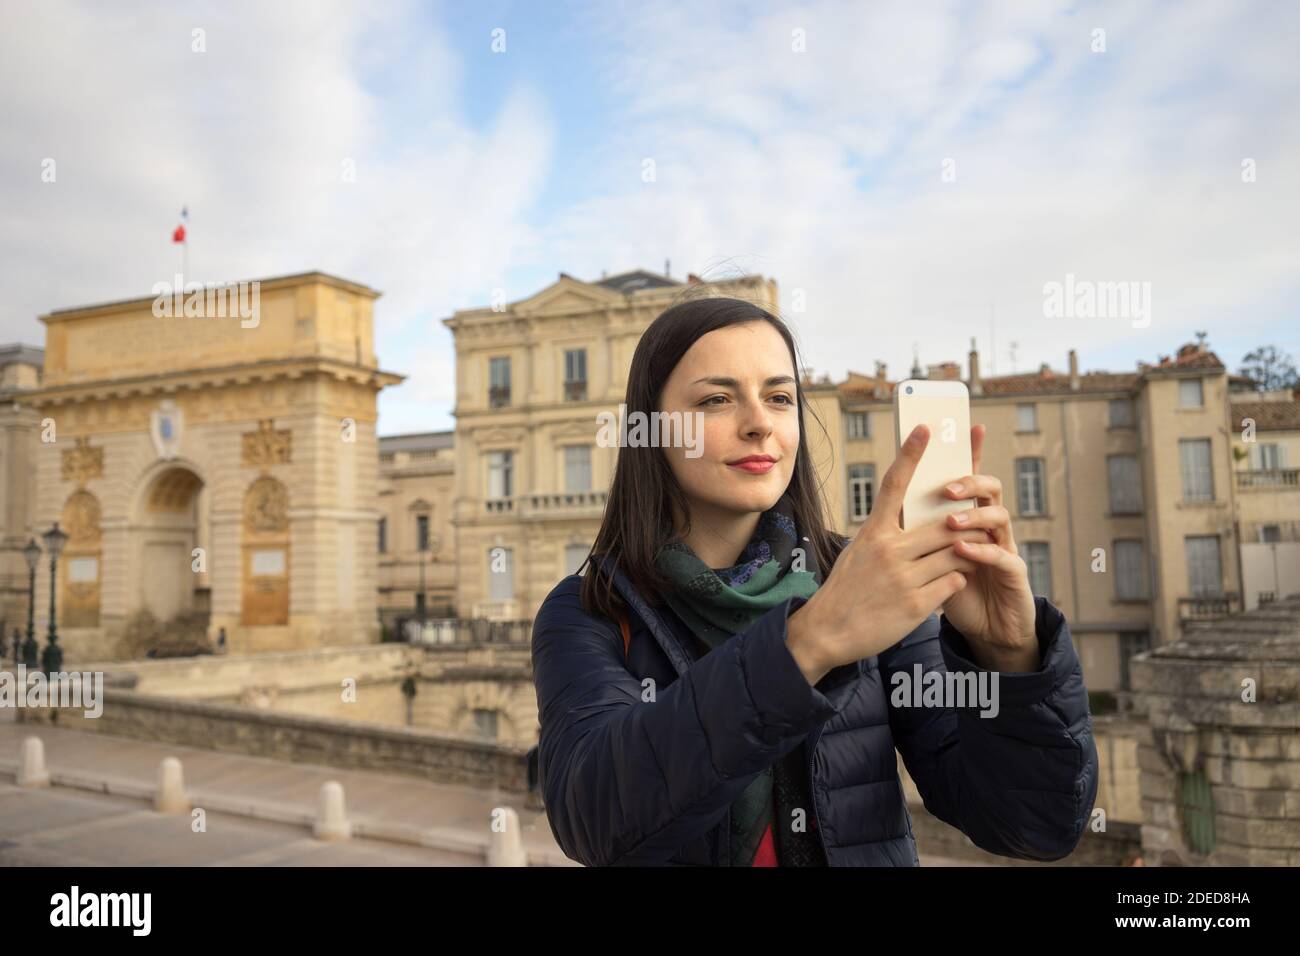 traveling woman thaking a sefie in France Stock Photo